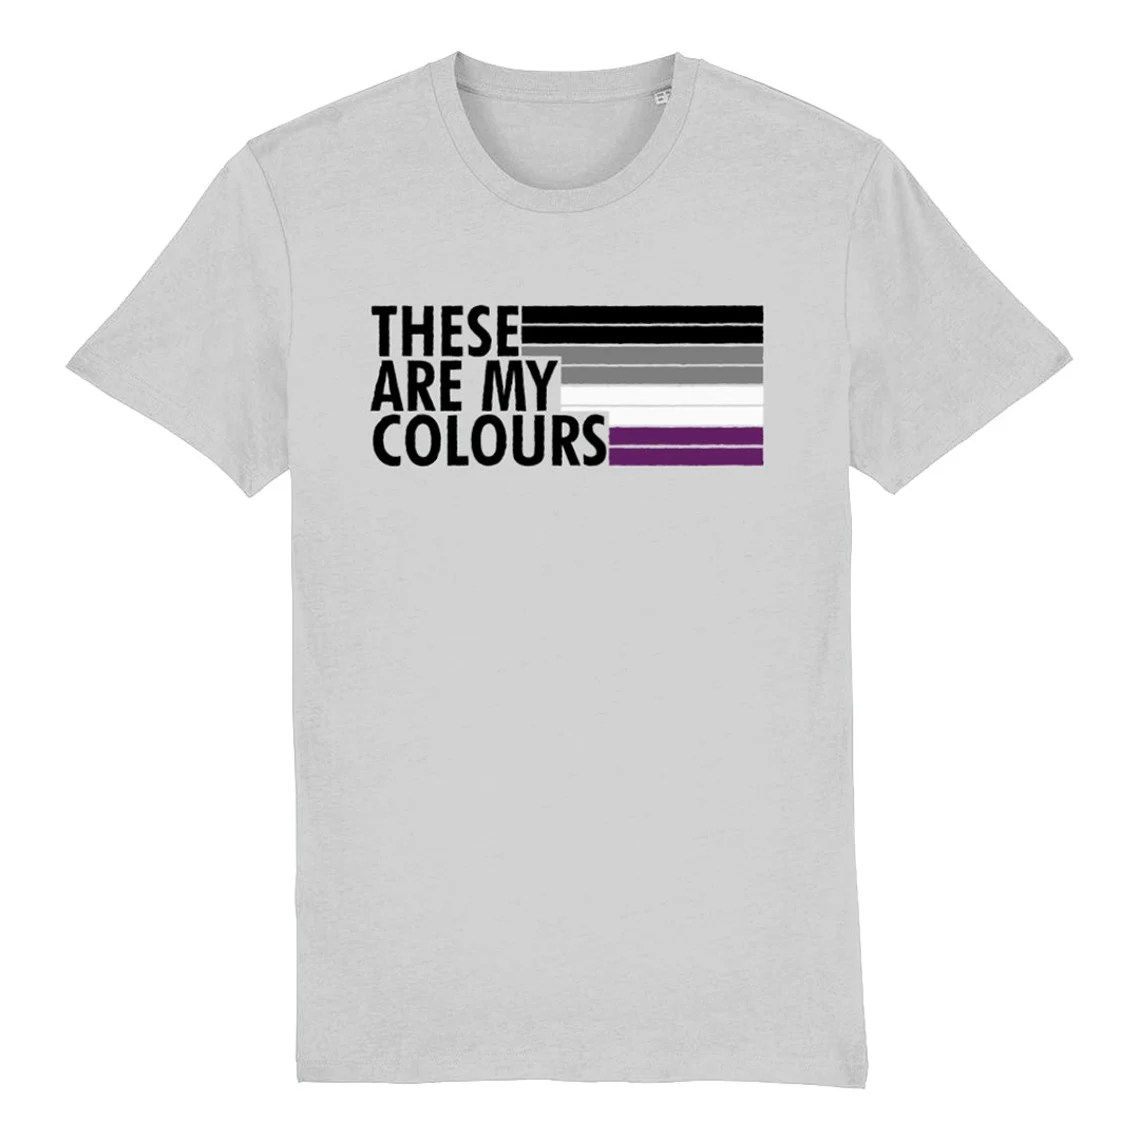 A t-shirt featuring the asexual Pride flag colours. 